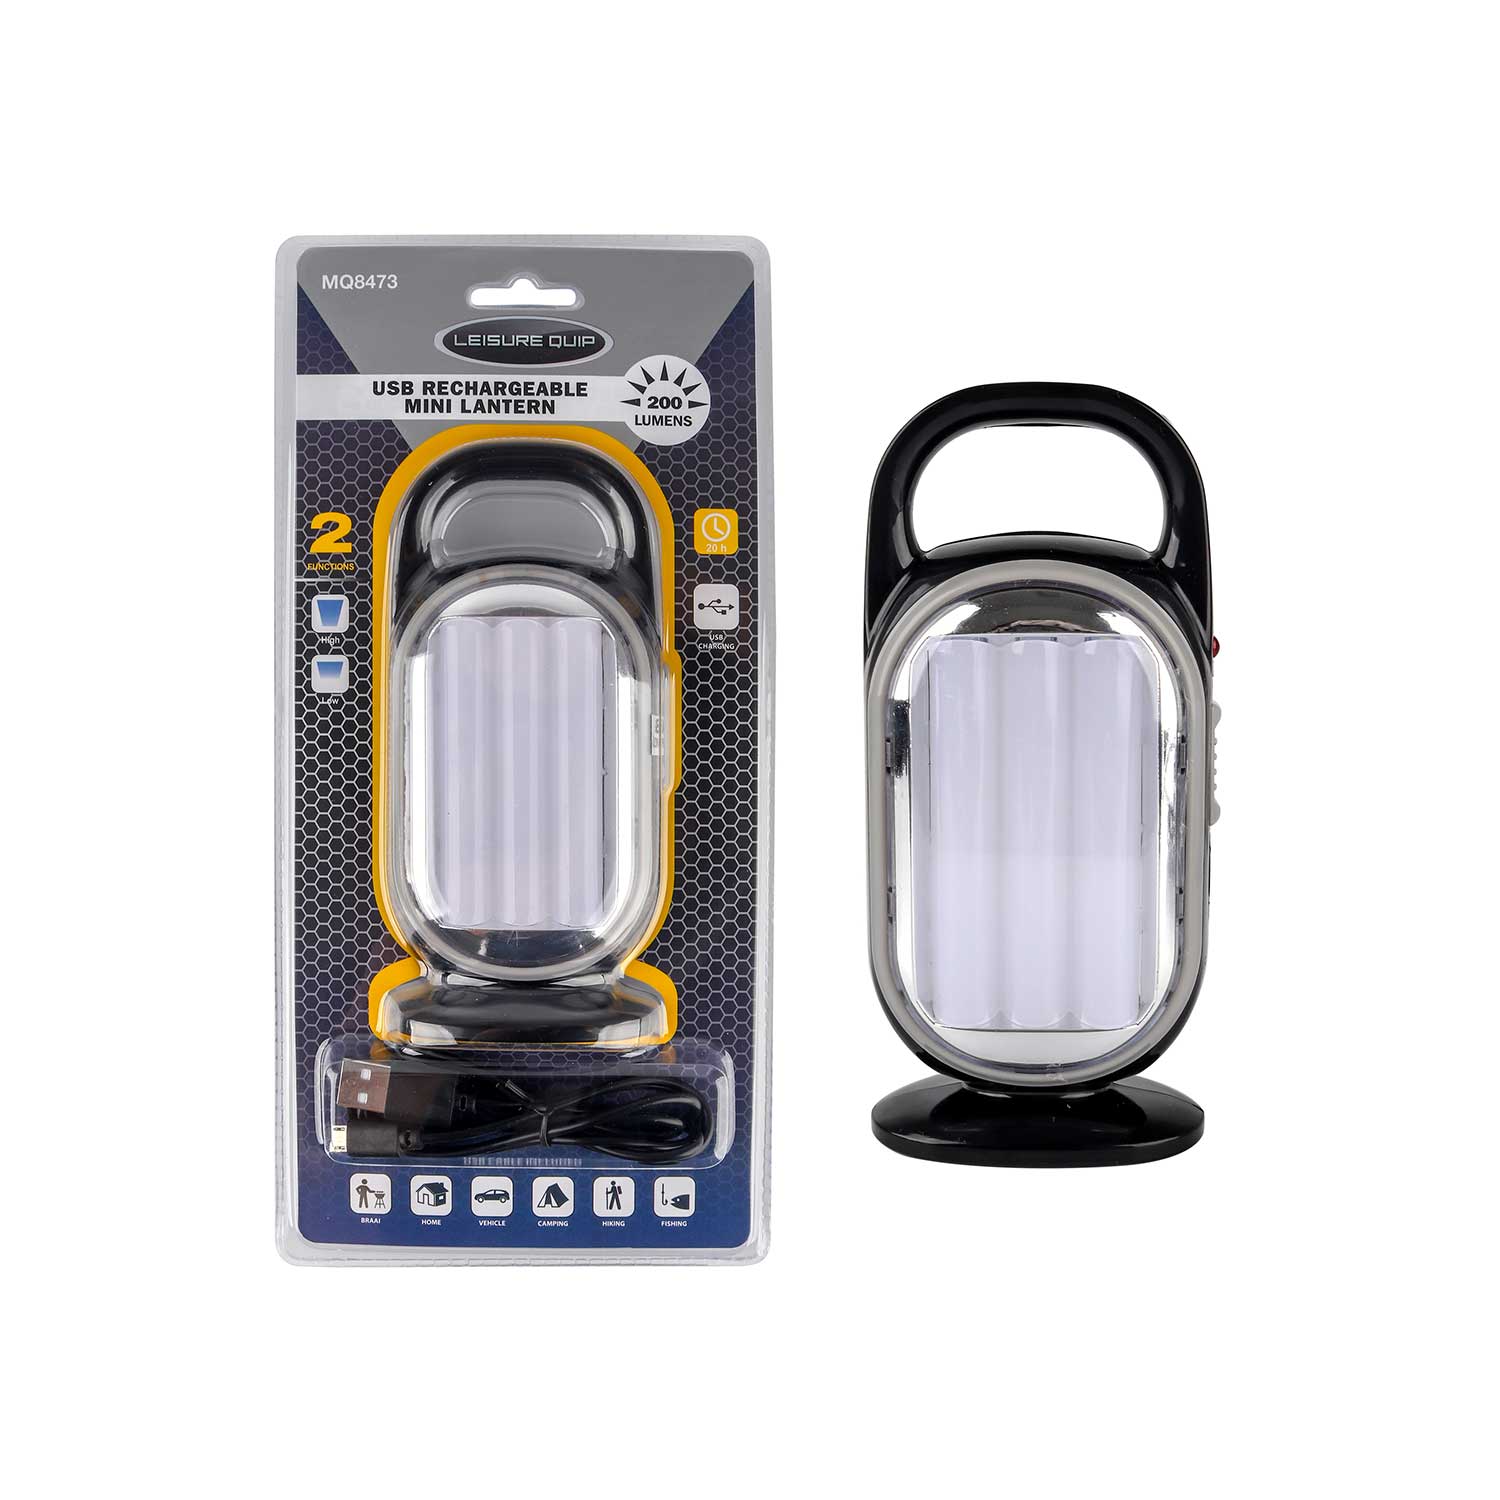 Usb Rechargeable Mini Lantern – 200 Lumens – 20 Hour Burn Time – Usb Cable Included – Colour Grey/Black – Usb Cable Included